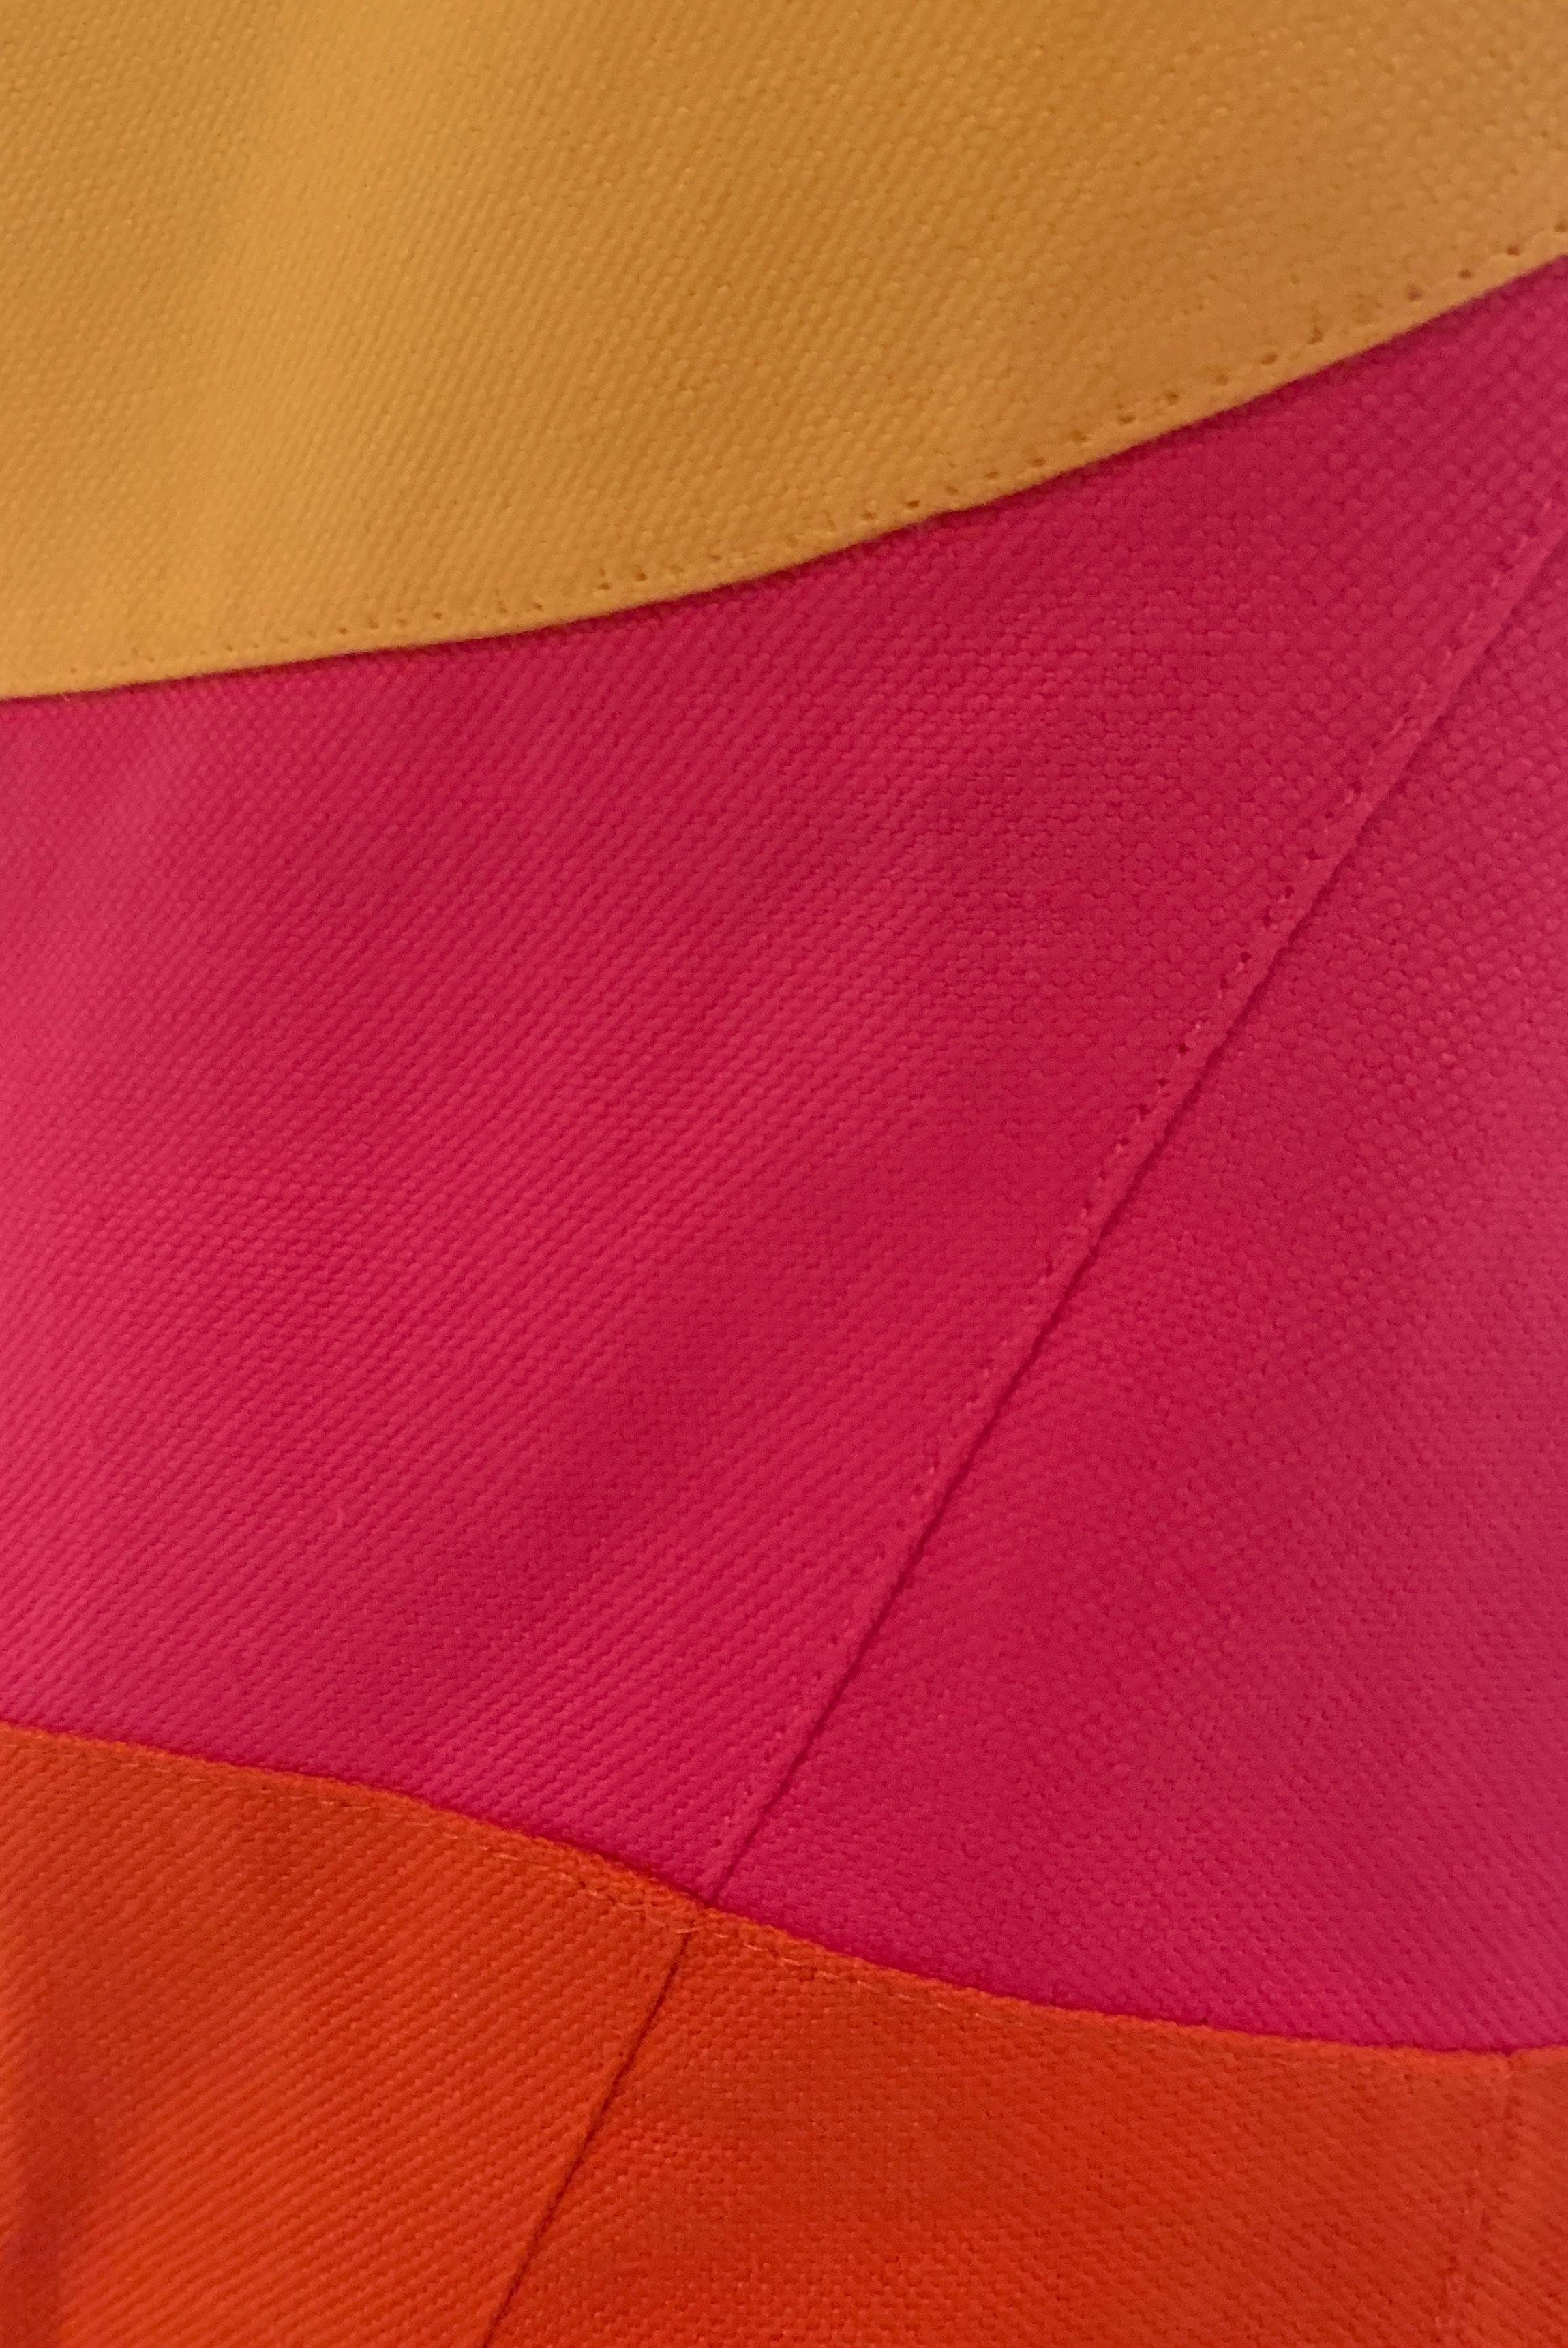 Red Thierry Mugler Vintage 1990s Pink Yellow Orange Color Block Harness Back Dress 